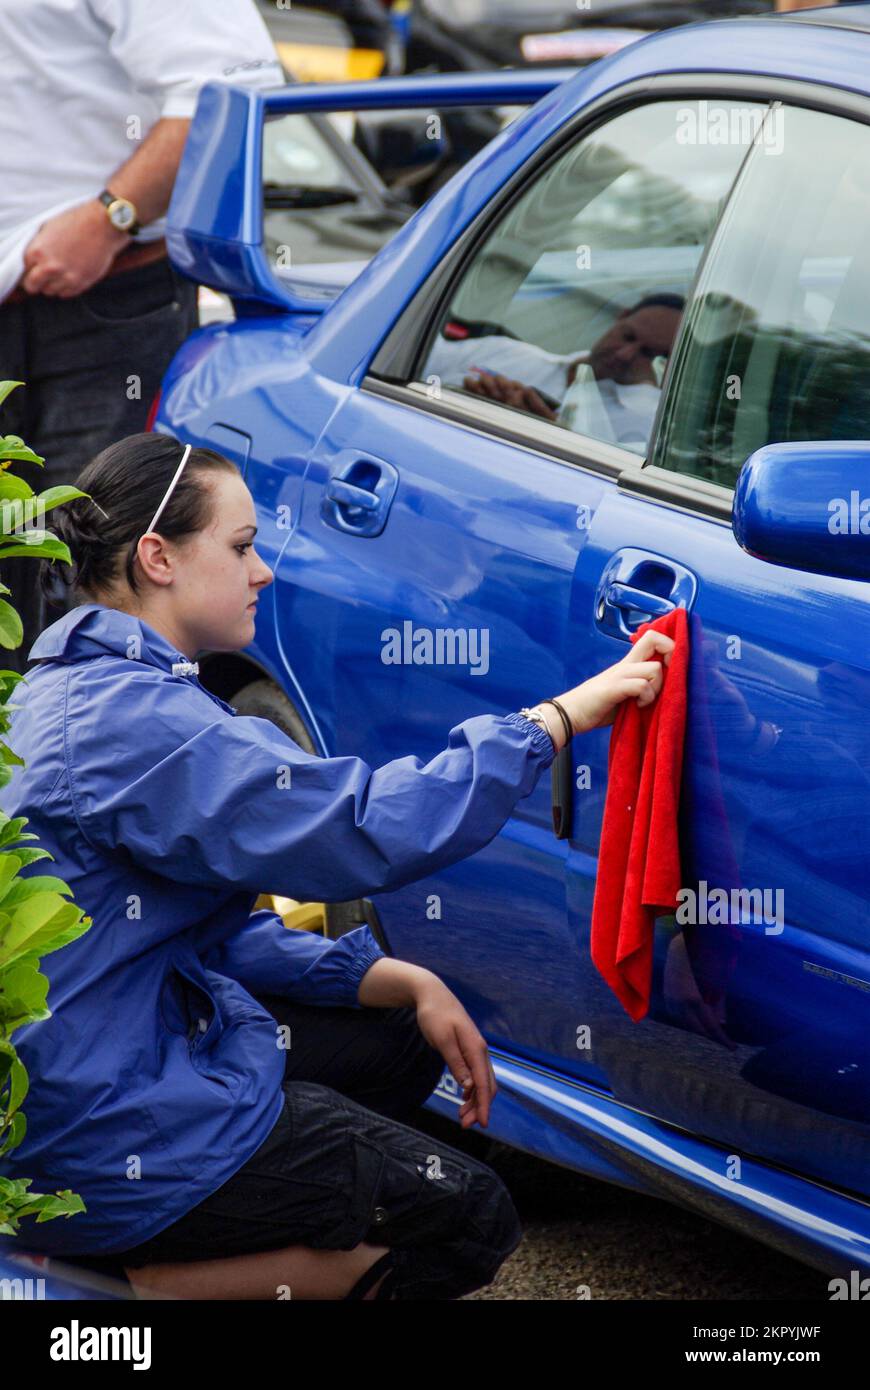 Female detail polishing a Subaru Impreza car at the McRae Gathering car rally event to commemorate the anniversary of the rally driver's death Stock Photo